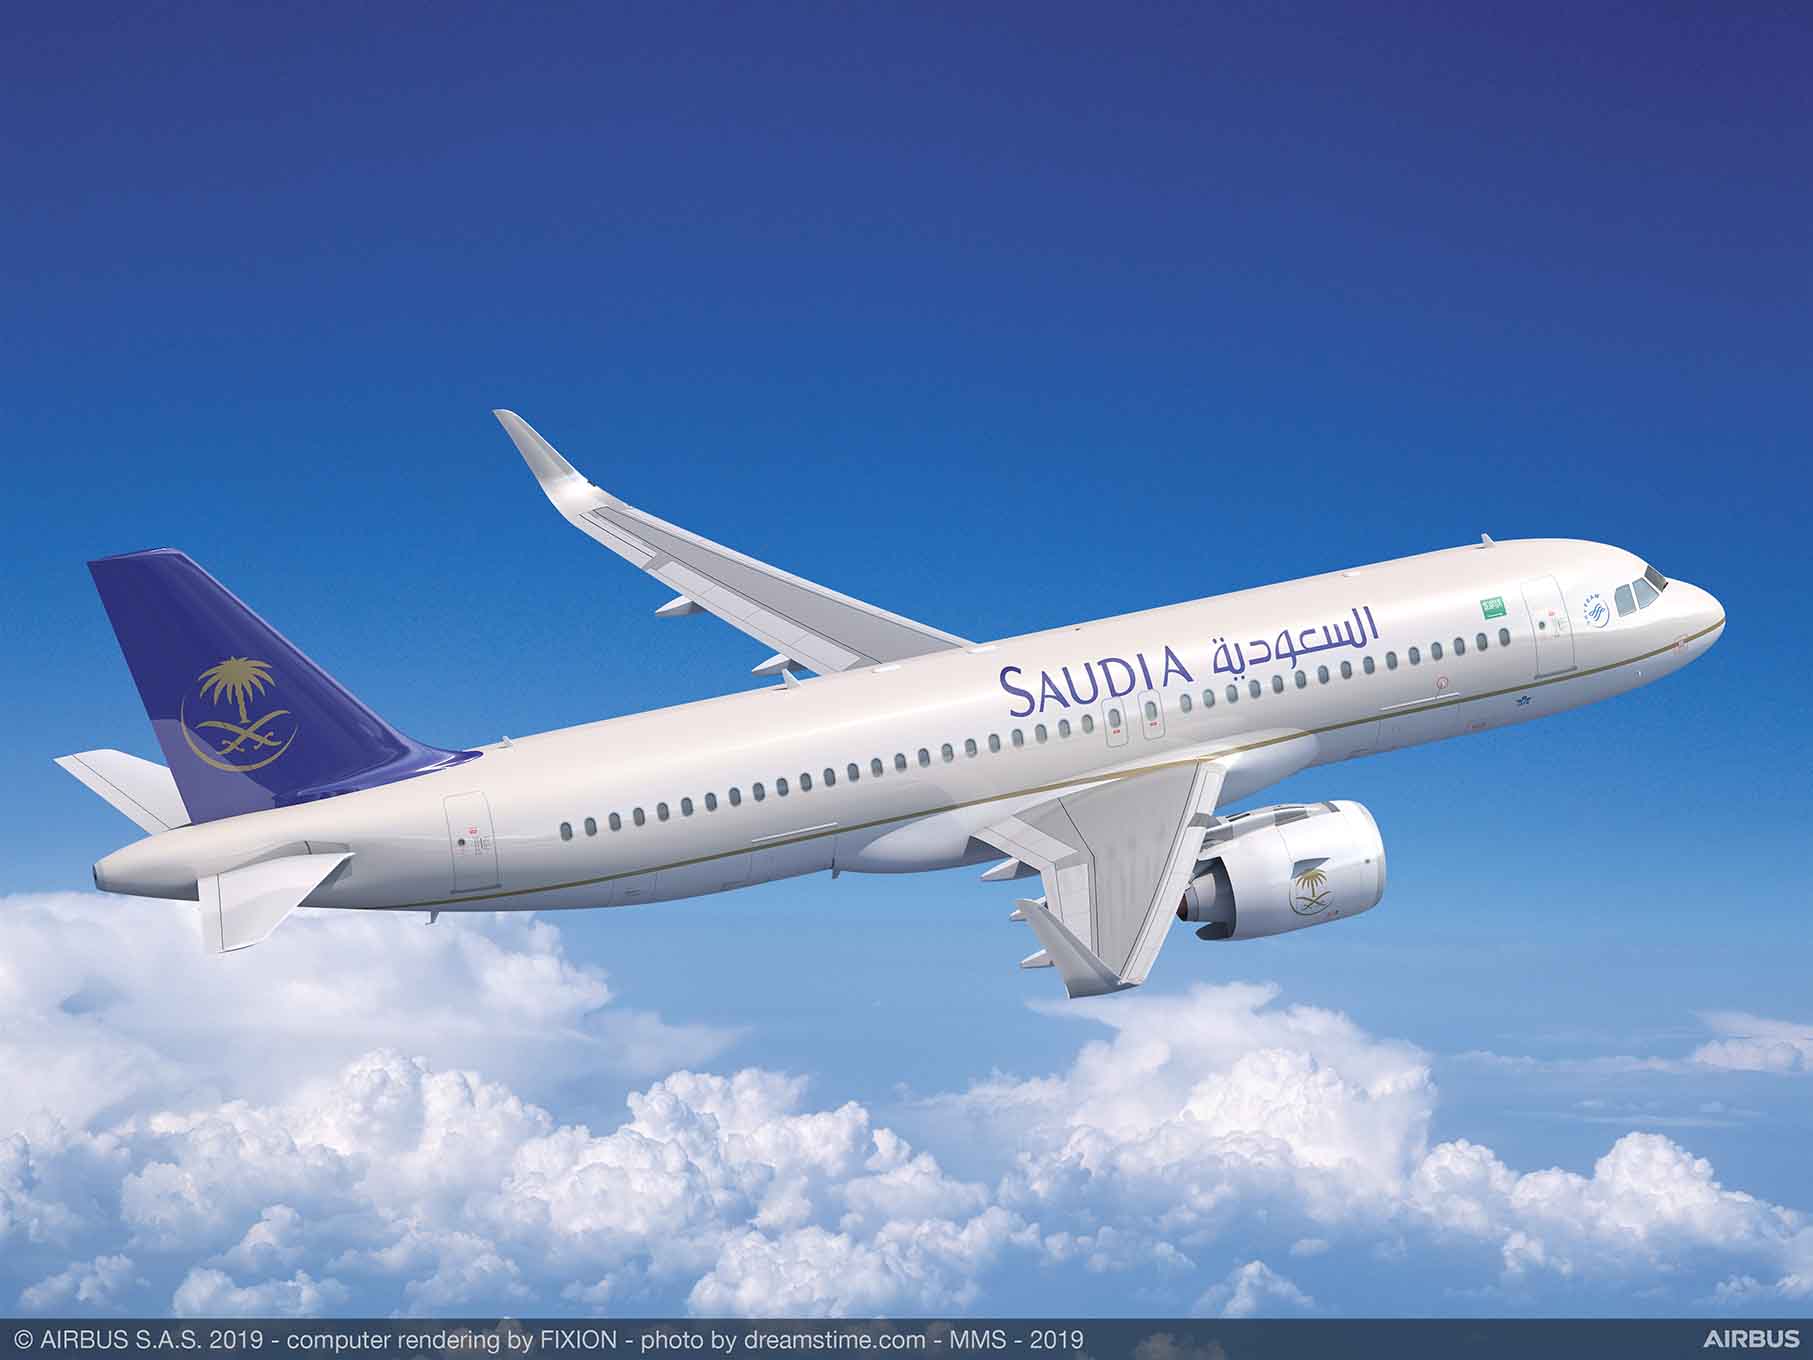 Saudia to benefit from SAL’s $678 million IPO